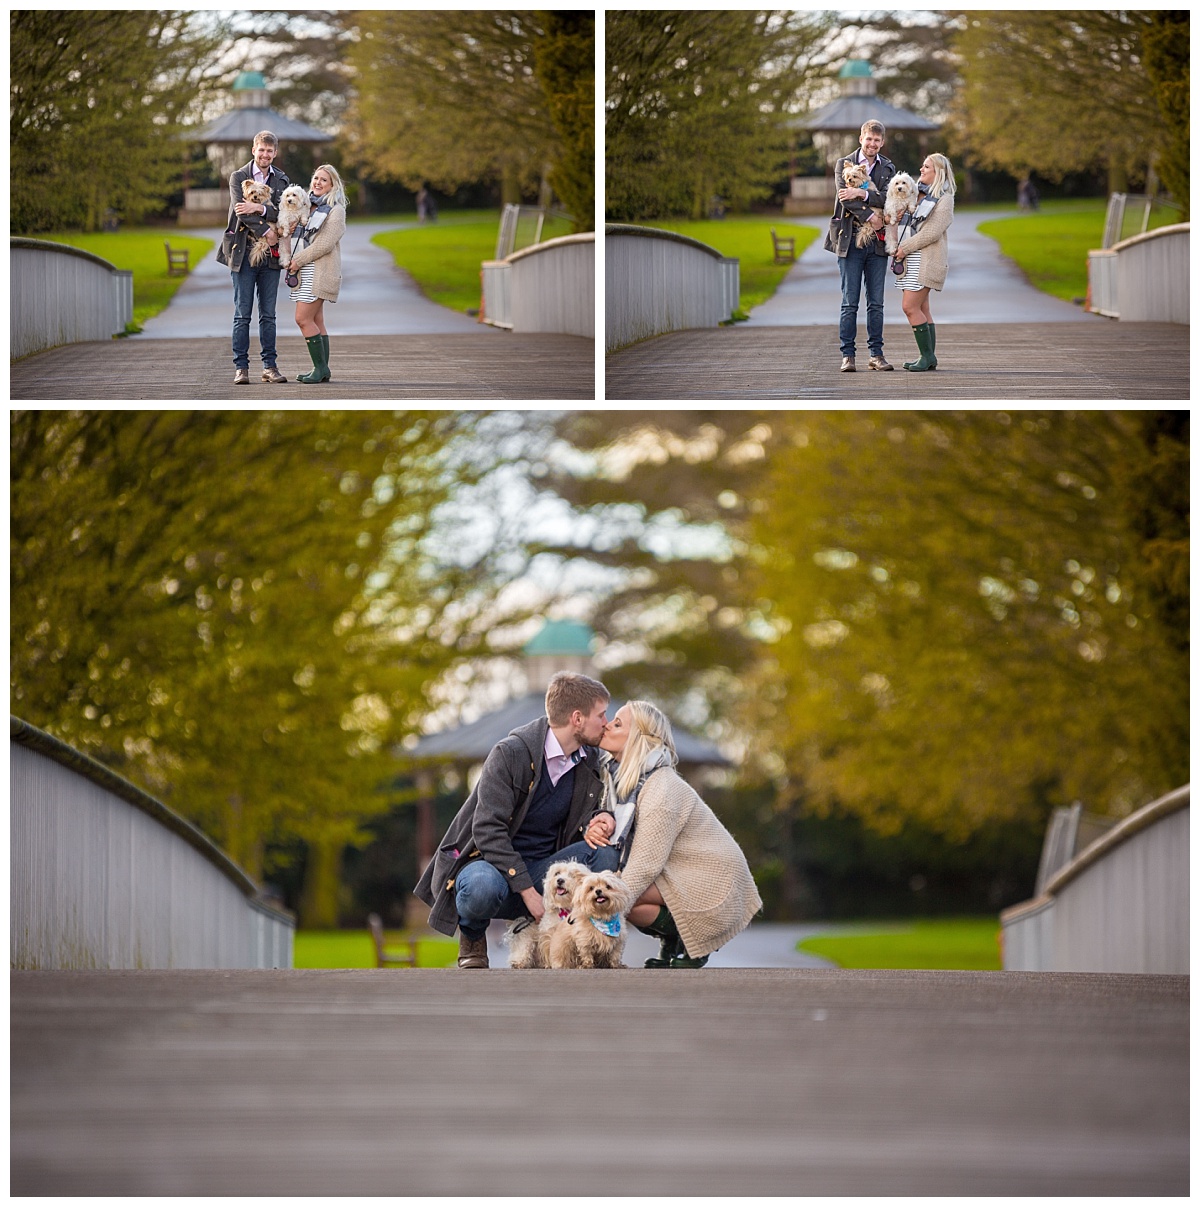 Engagement Shoot in a Park